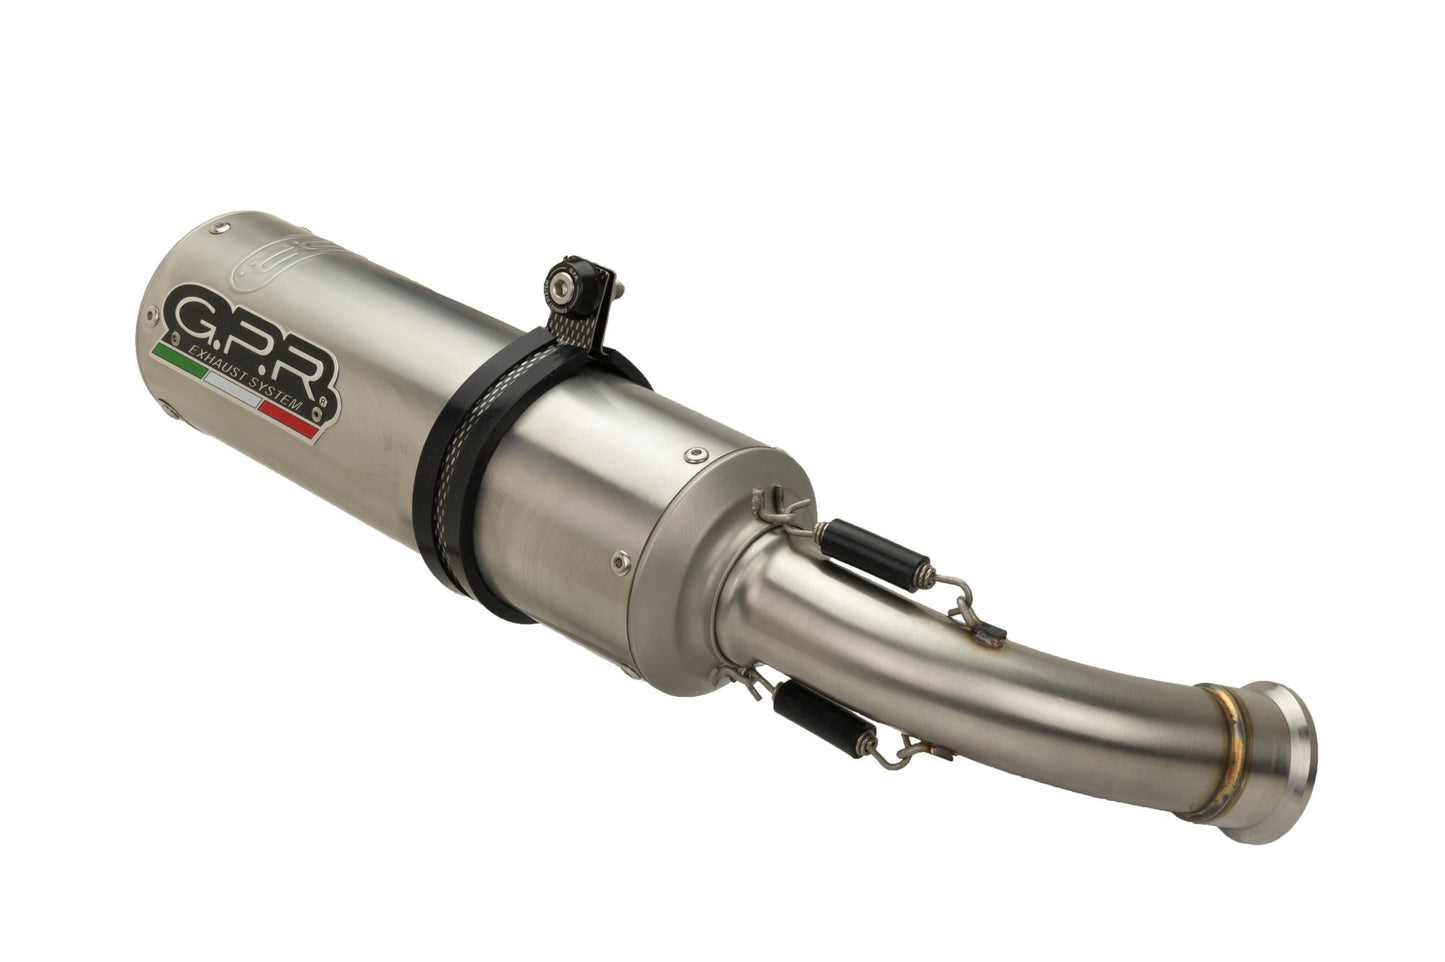 GPR Exhaust for Bmw R Nine-T 1200 - Pure - Racer - Urban G/S 2017-2019, M3 Inox , Slip-on Exhaust Including Removable DB Killer and Link Pipe